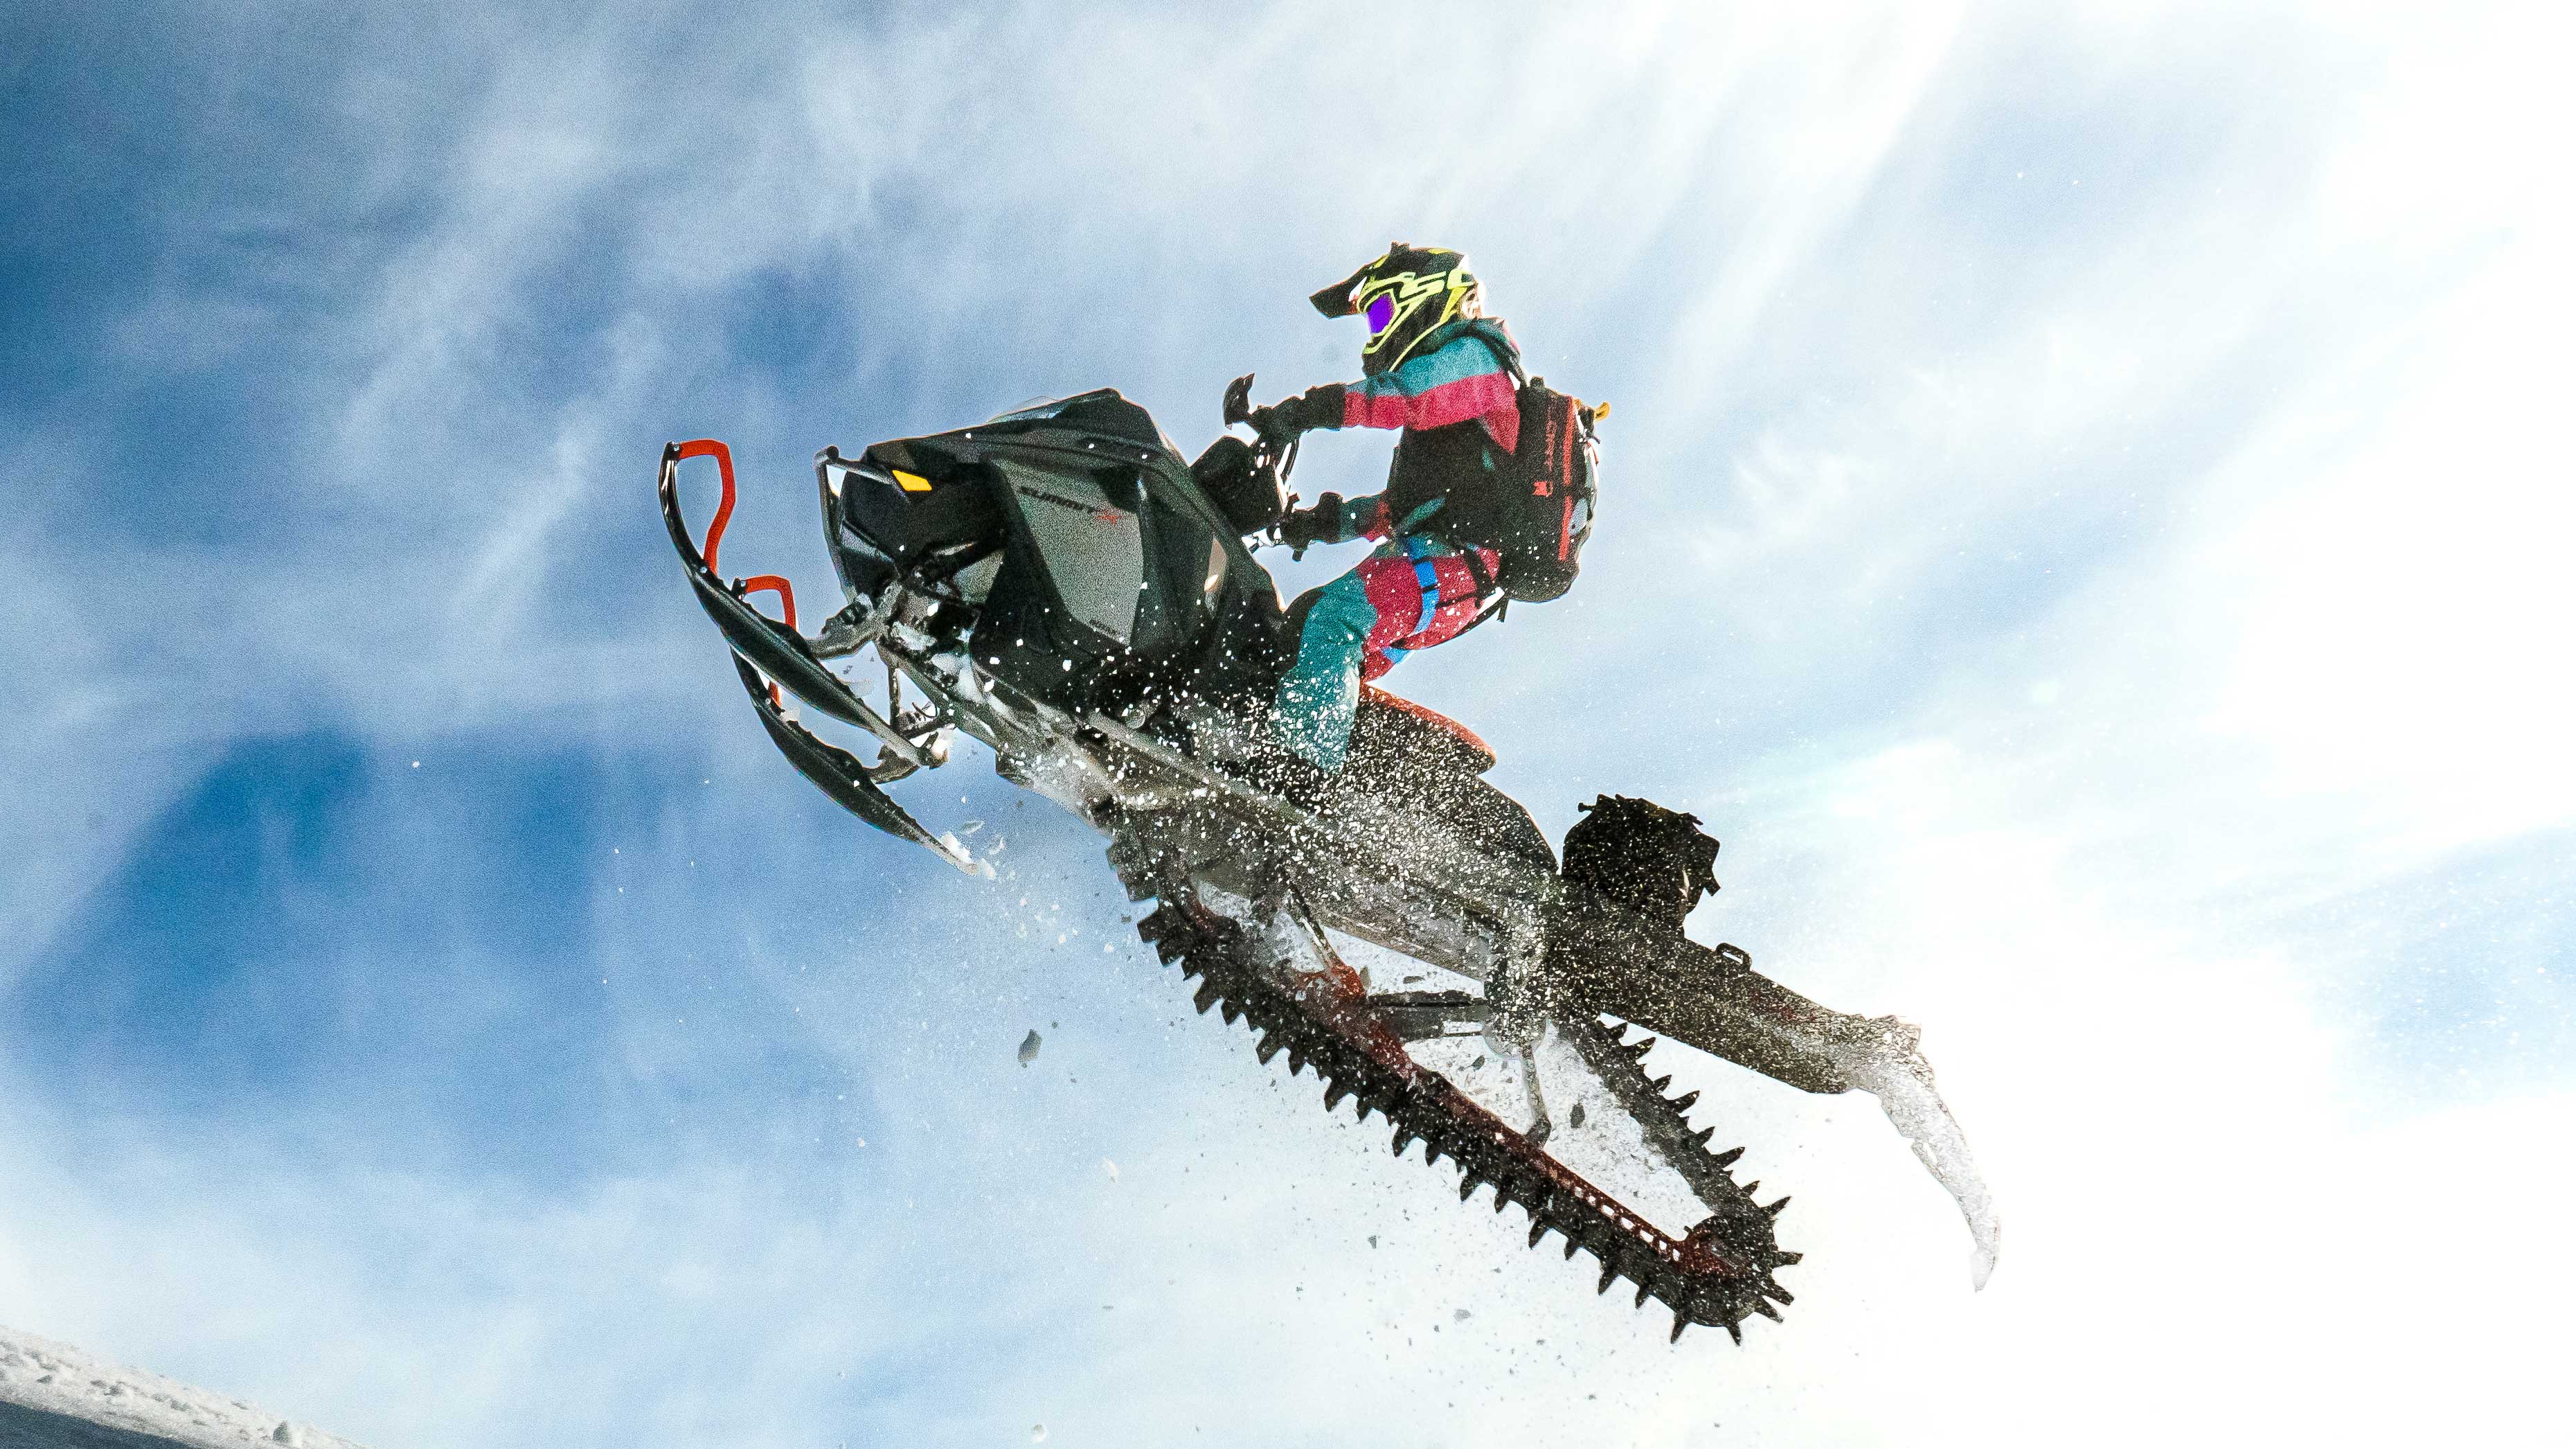 Lisa Granden making a jump with her Ski-Doo snowmobile